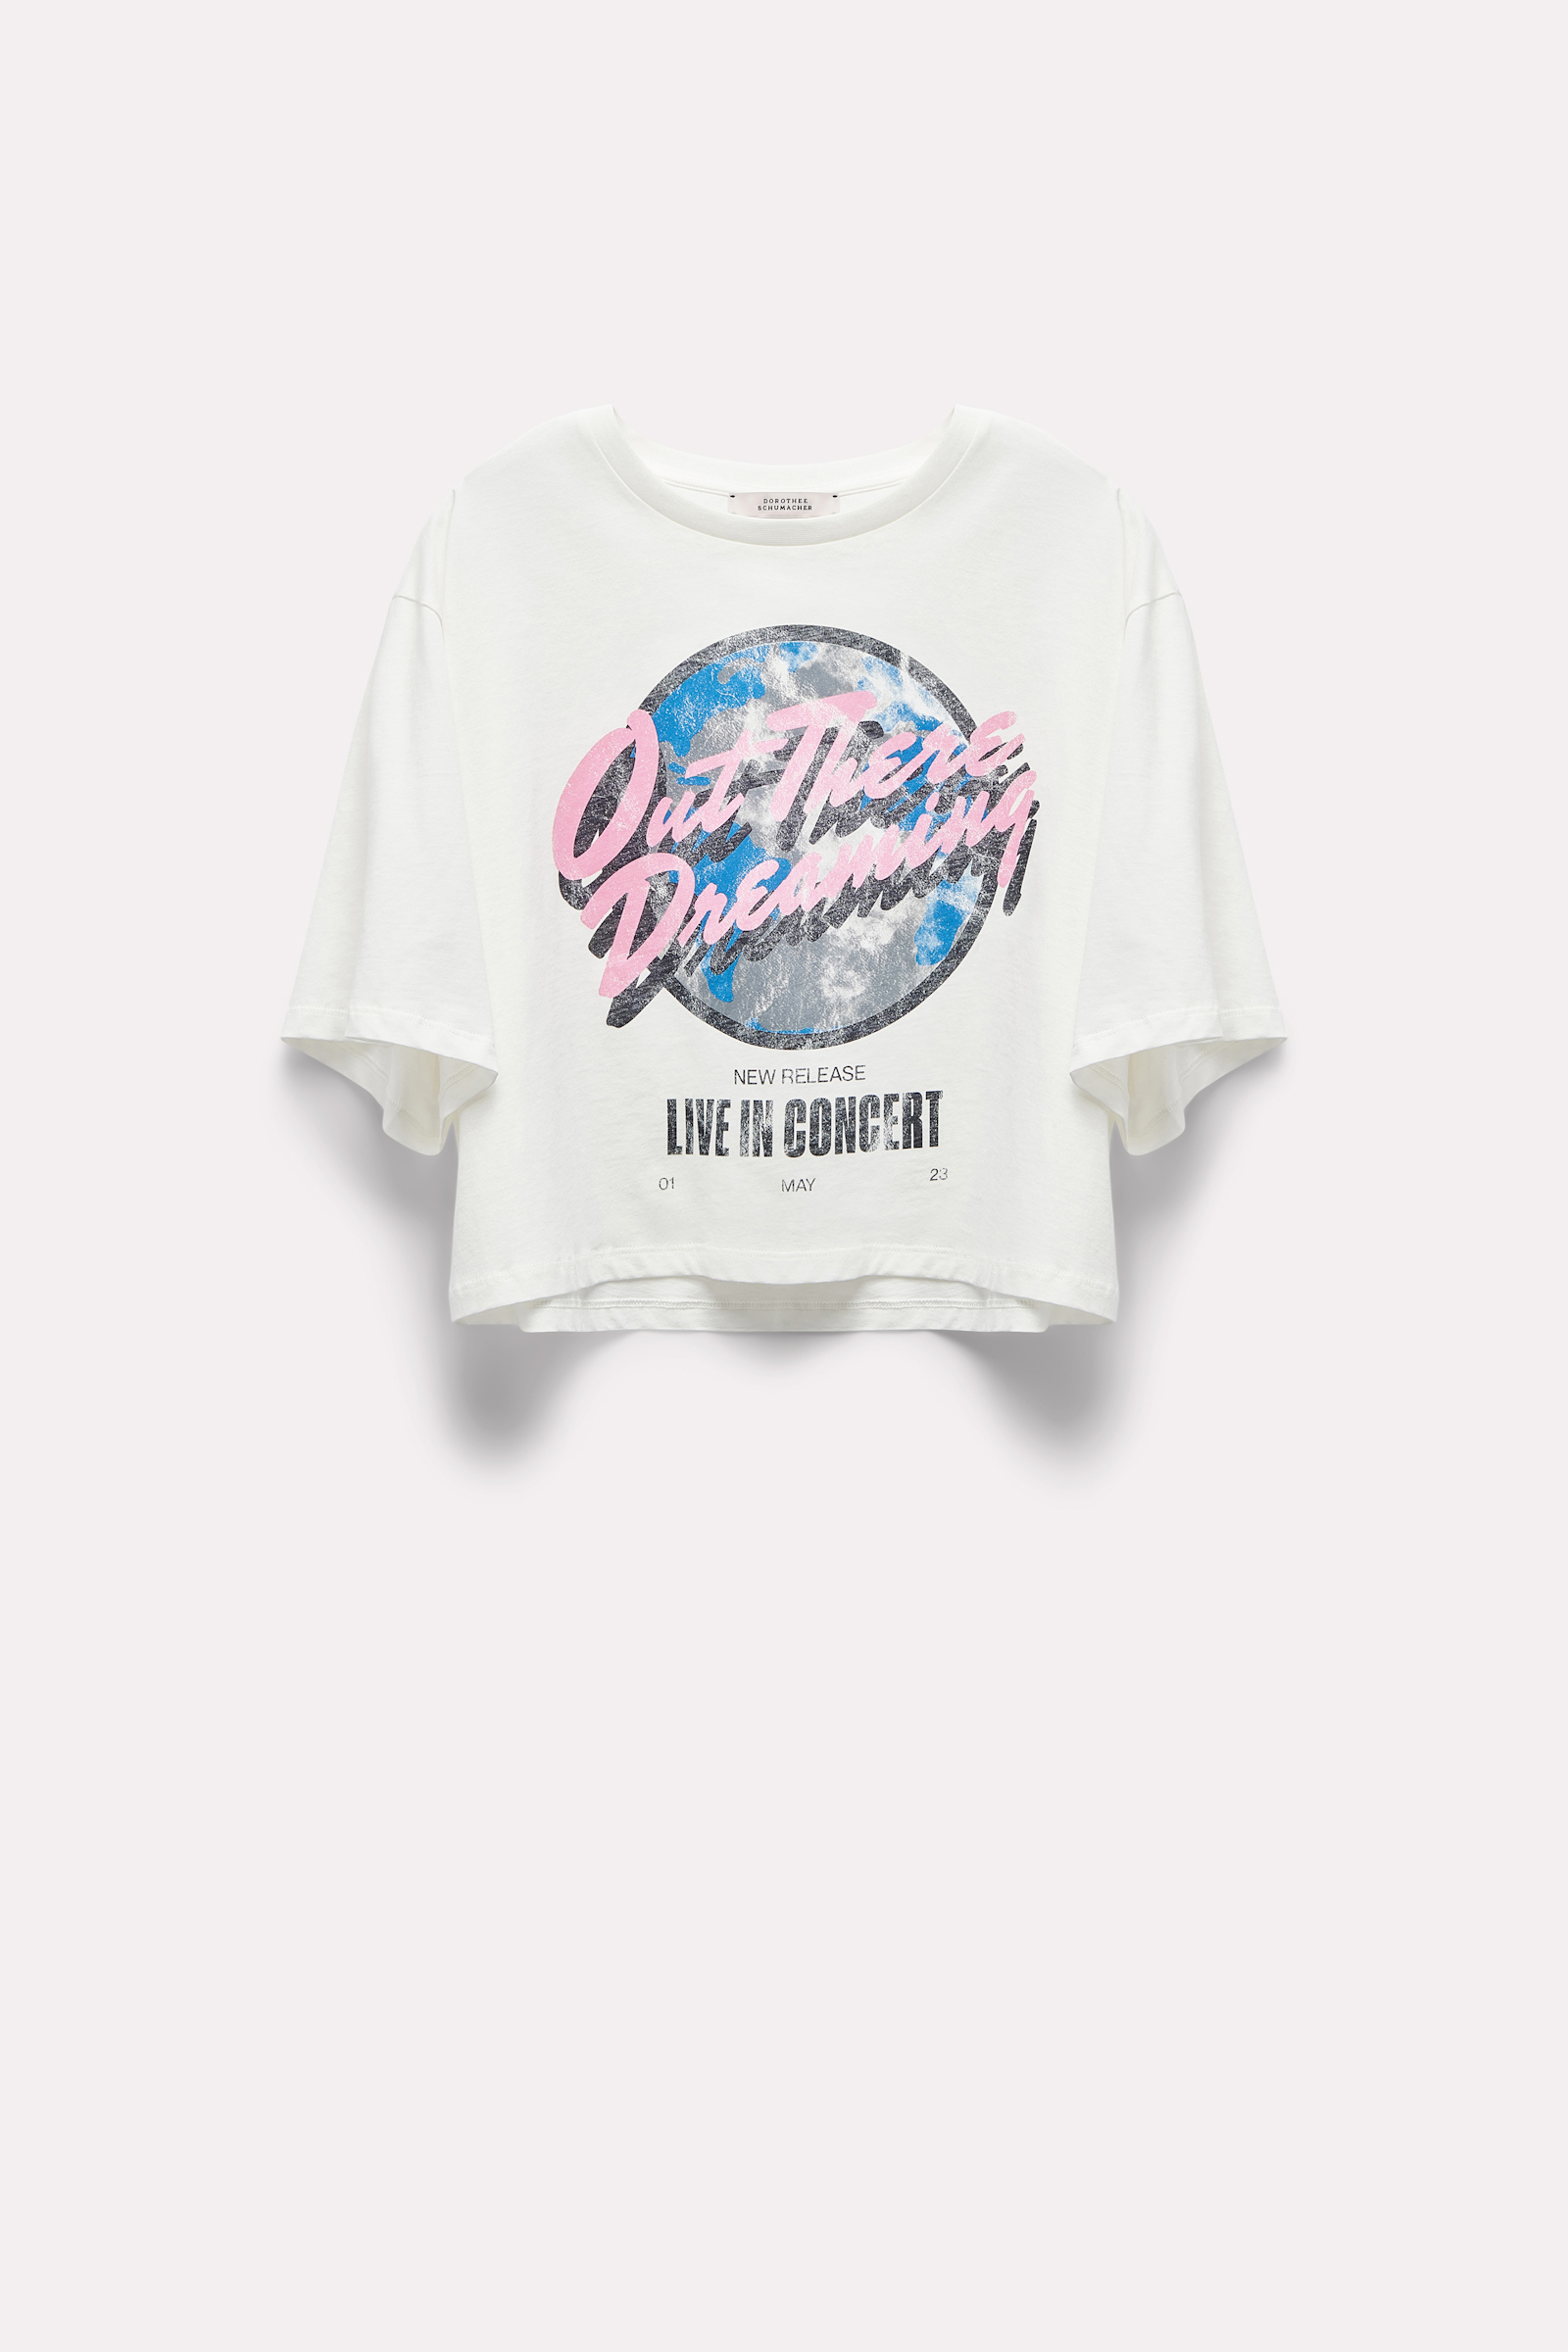 OUT THERE DREAMING shirt